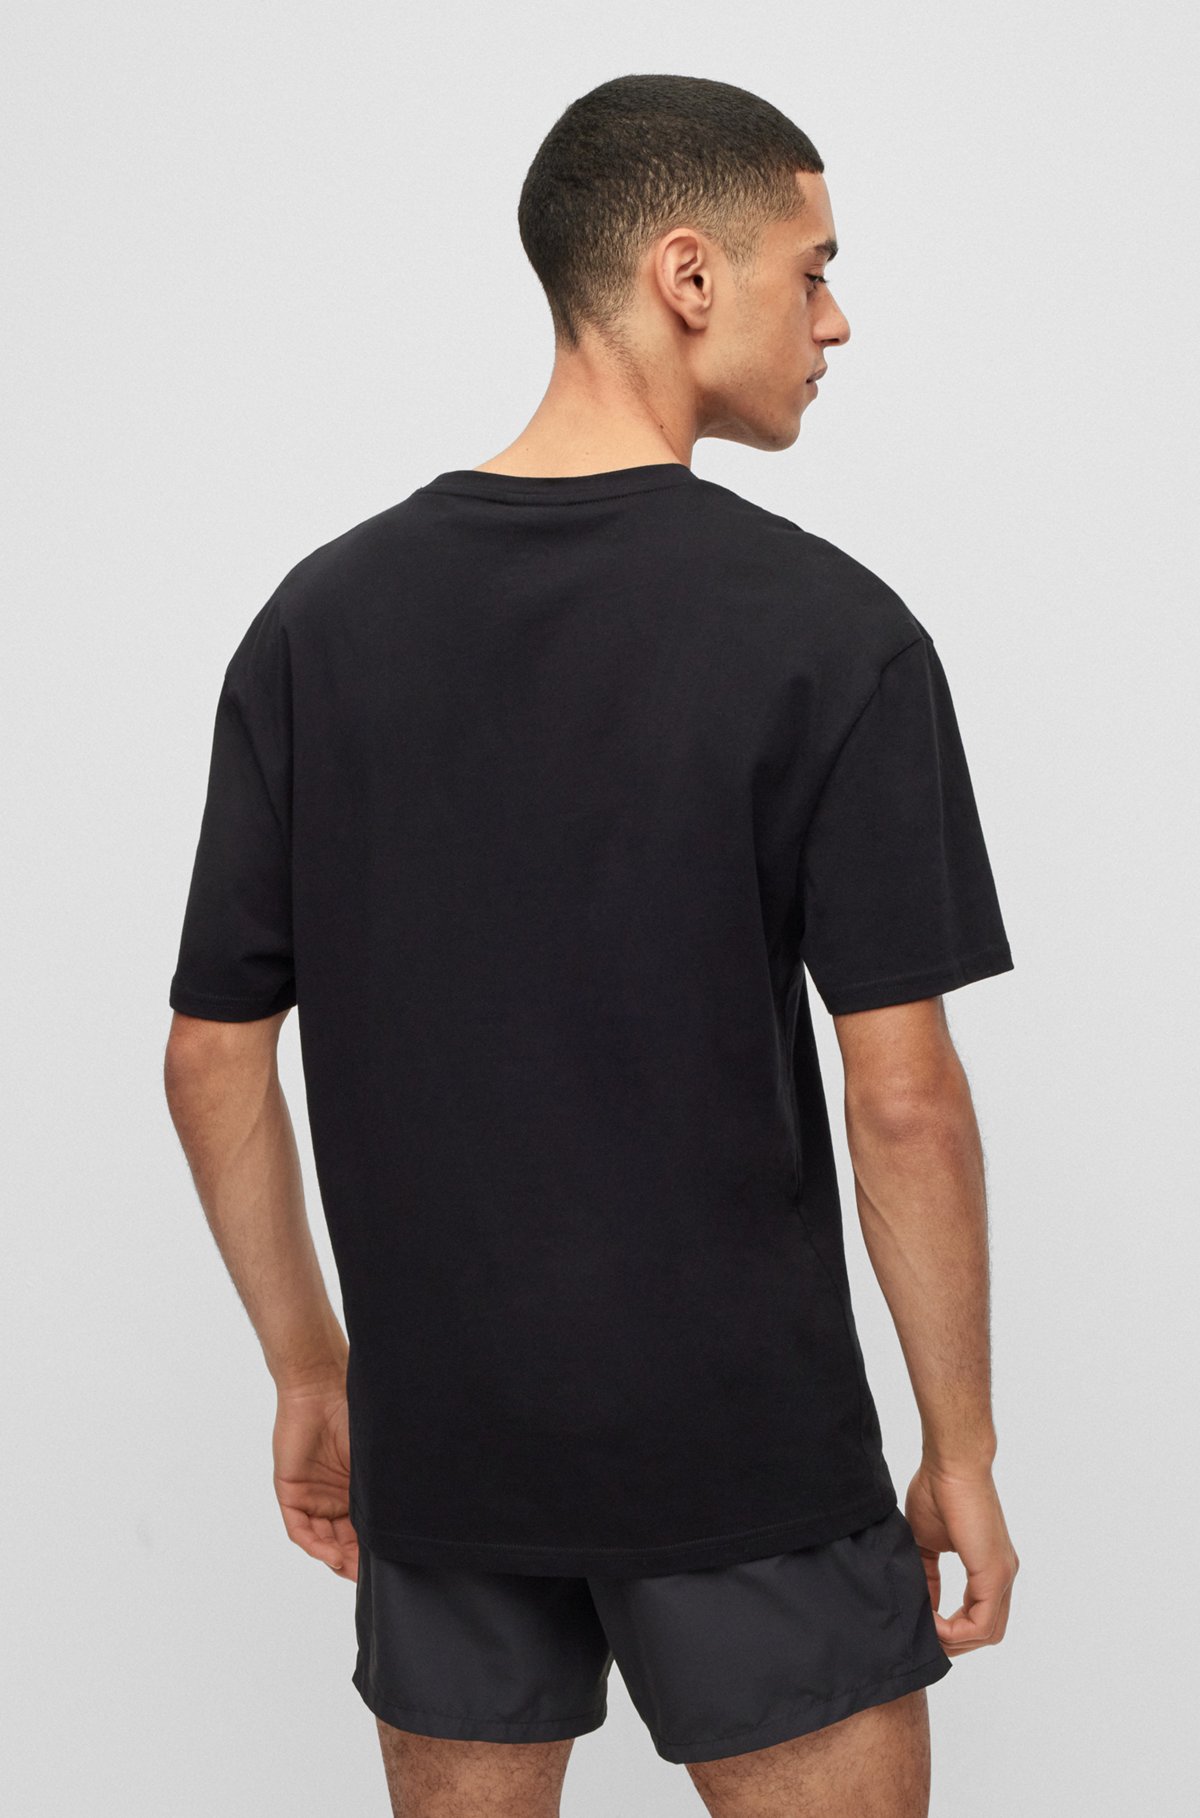 Relaxed-fit T-shirt in cotton with vertical logo print, Black